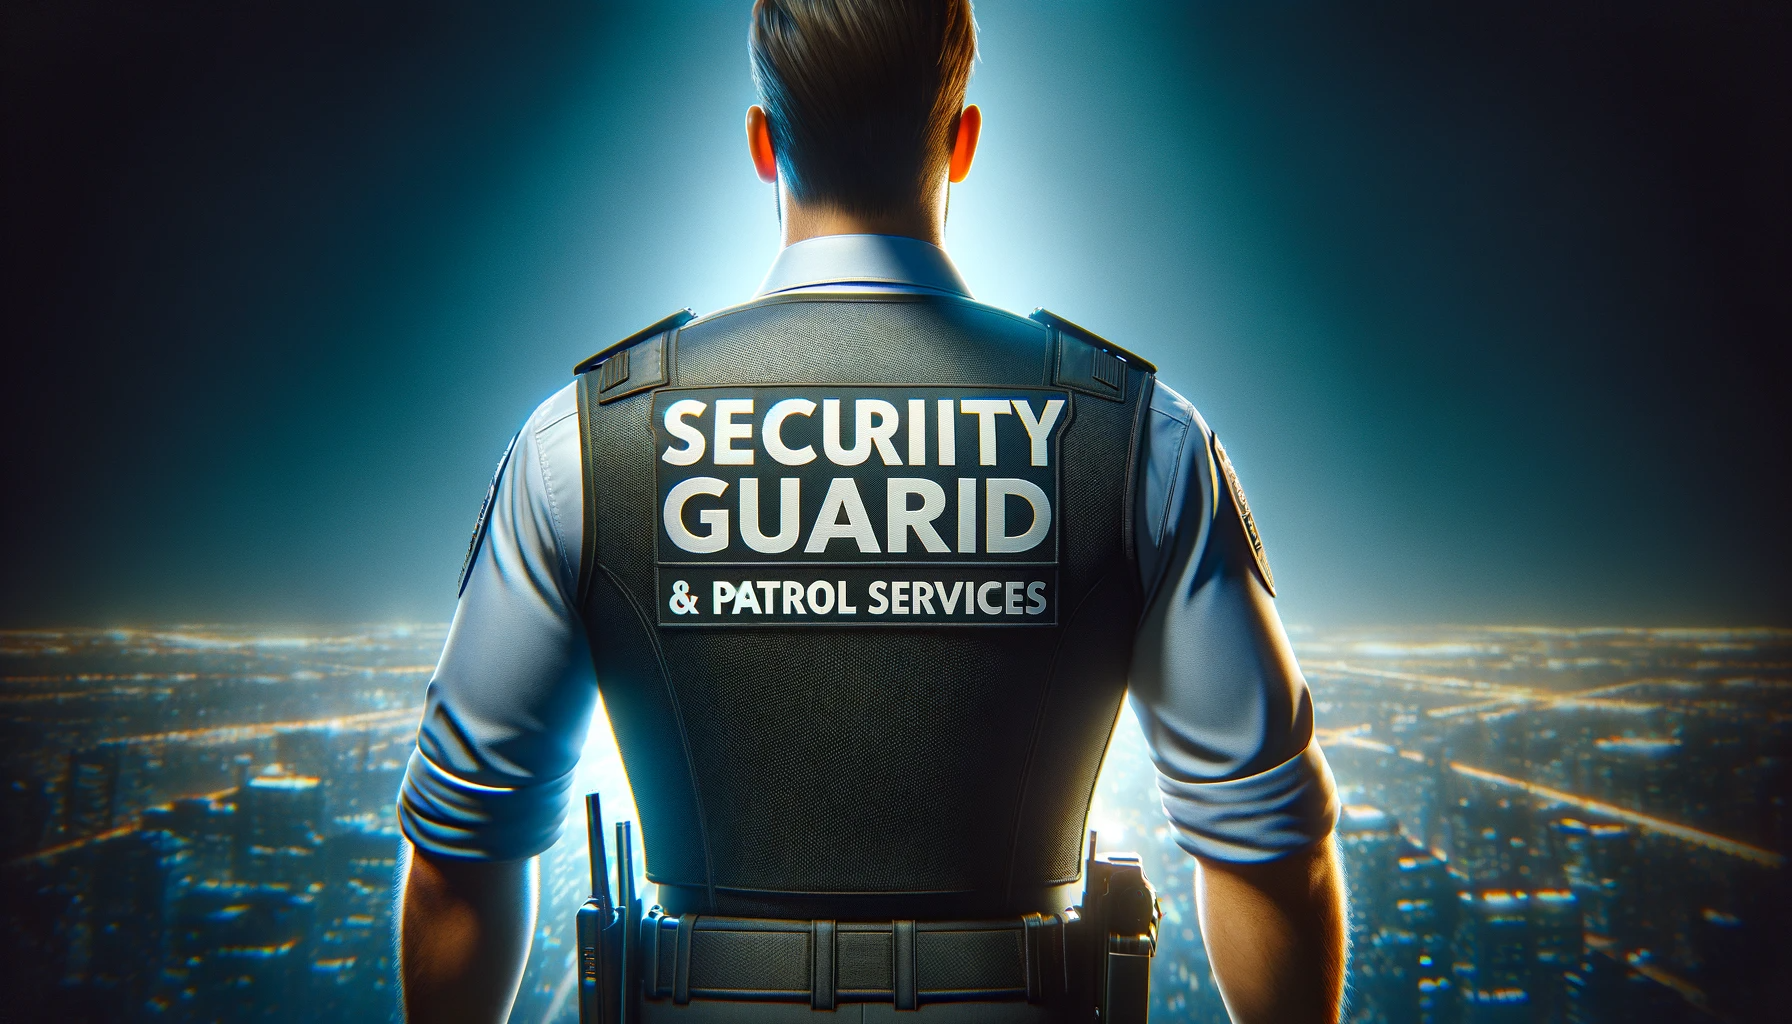 Expert Security Guard Services for Construction Sites